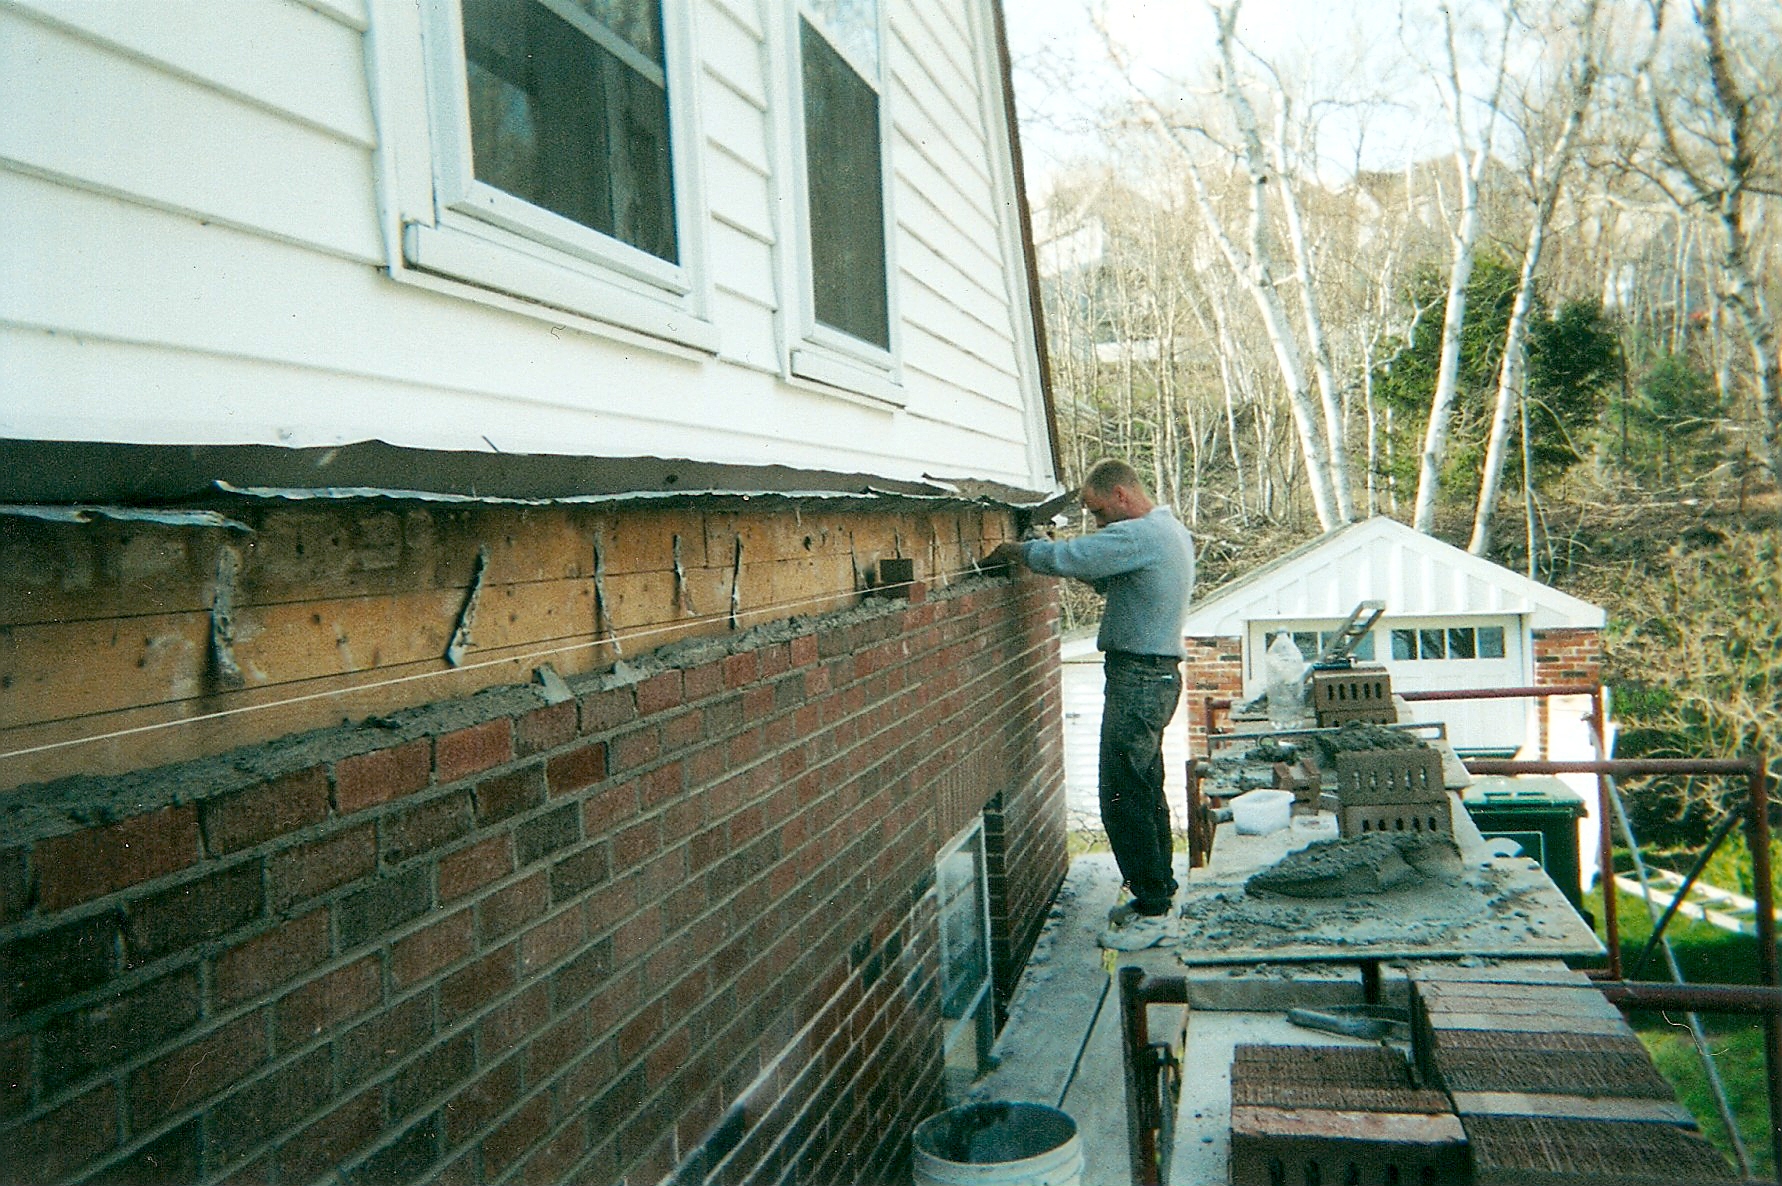 masonry repair services completed in Halifax, NS by Pro Chimney Services based in Halifax-Dartmouth Regional Municipality, NS is providing masonry repair services to all of the Halifax-Dartmouth Regional Municipality, Bedford, Sackville, Mount Uniacke, Hantsport, Windsor, Wolfville, Kentville, Chester Basin, Mahone Bay, Lunenburg, Bridgewater, Liverpool, Fall River, Wellington, Enfield, Elmsdale, Brookfield, Truro, Musquodoboit Harbour & surrounding areas.